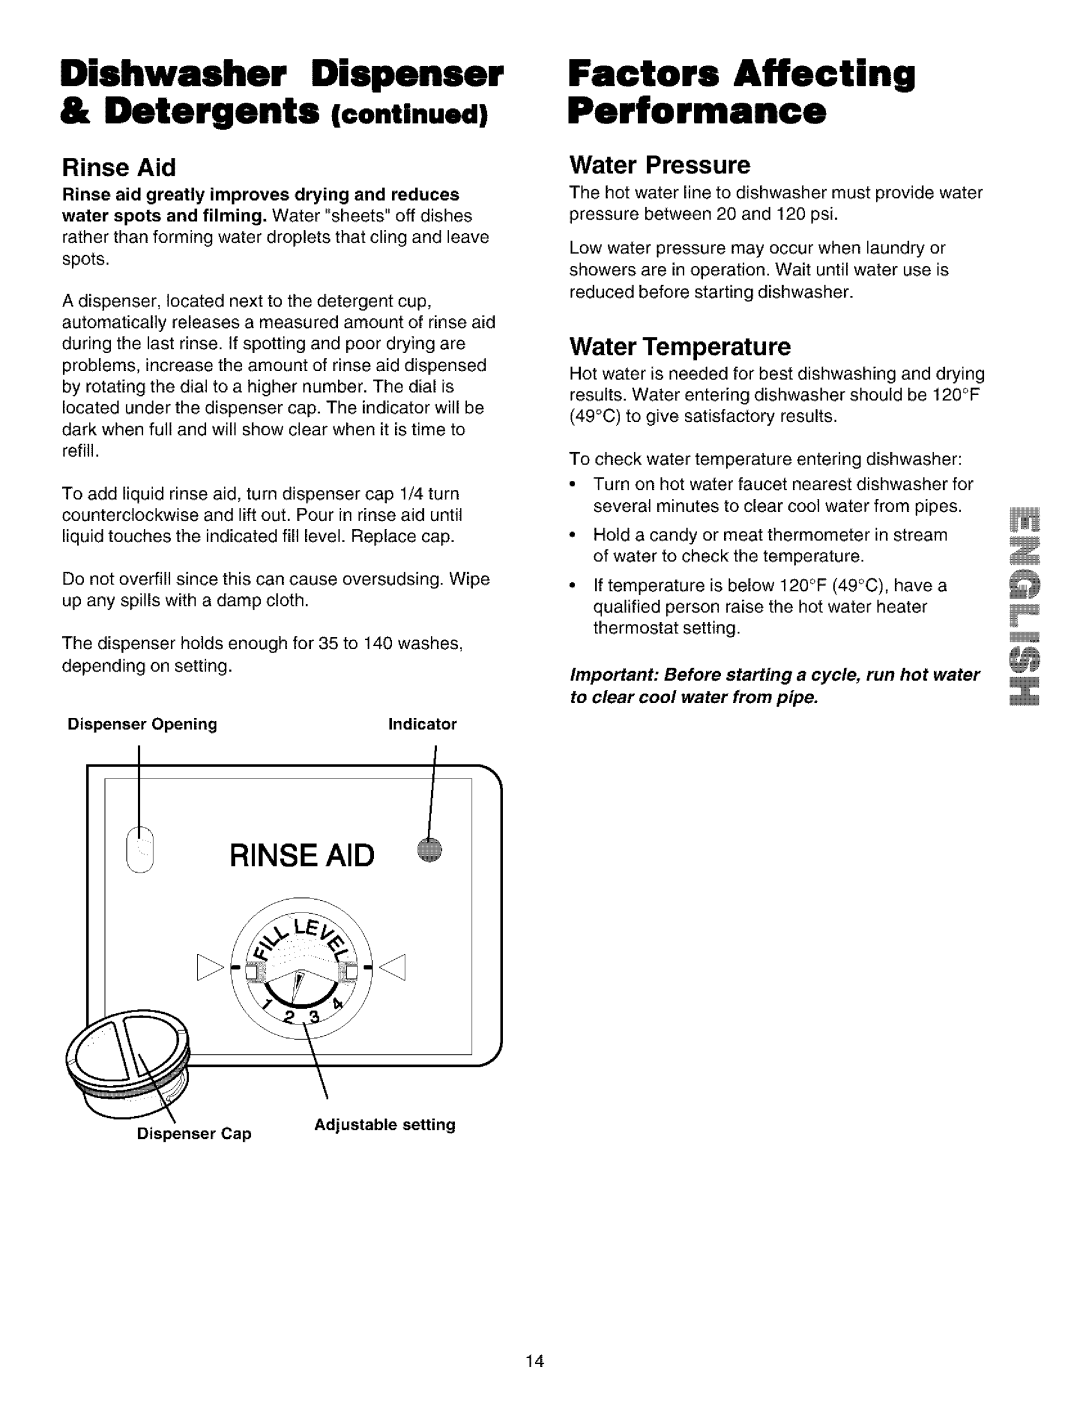 Kenmore 587.14202 Dishwasher Dispenser & Detergents continued, Factors Affecting Performance, Rinse Aid, Water Pressure 